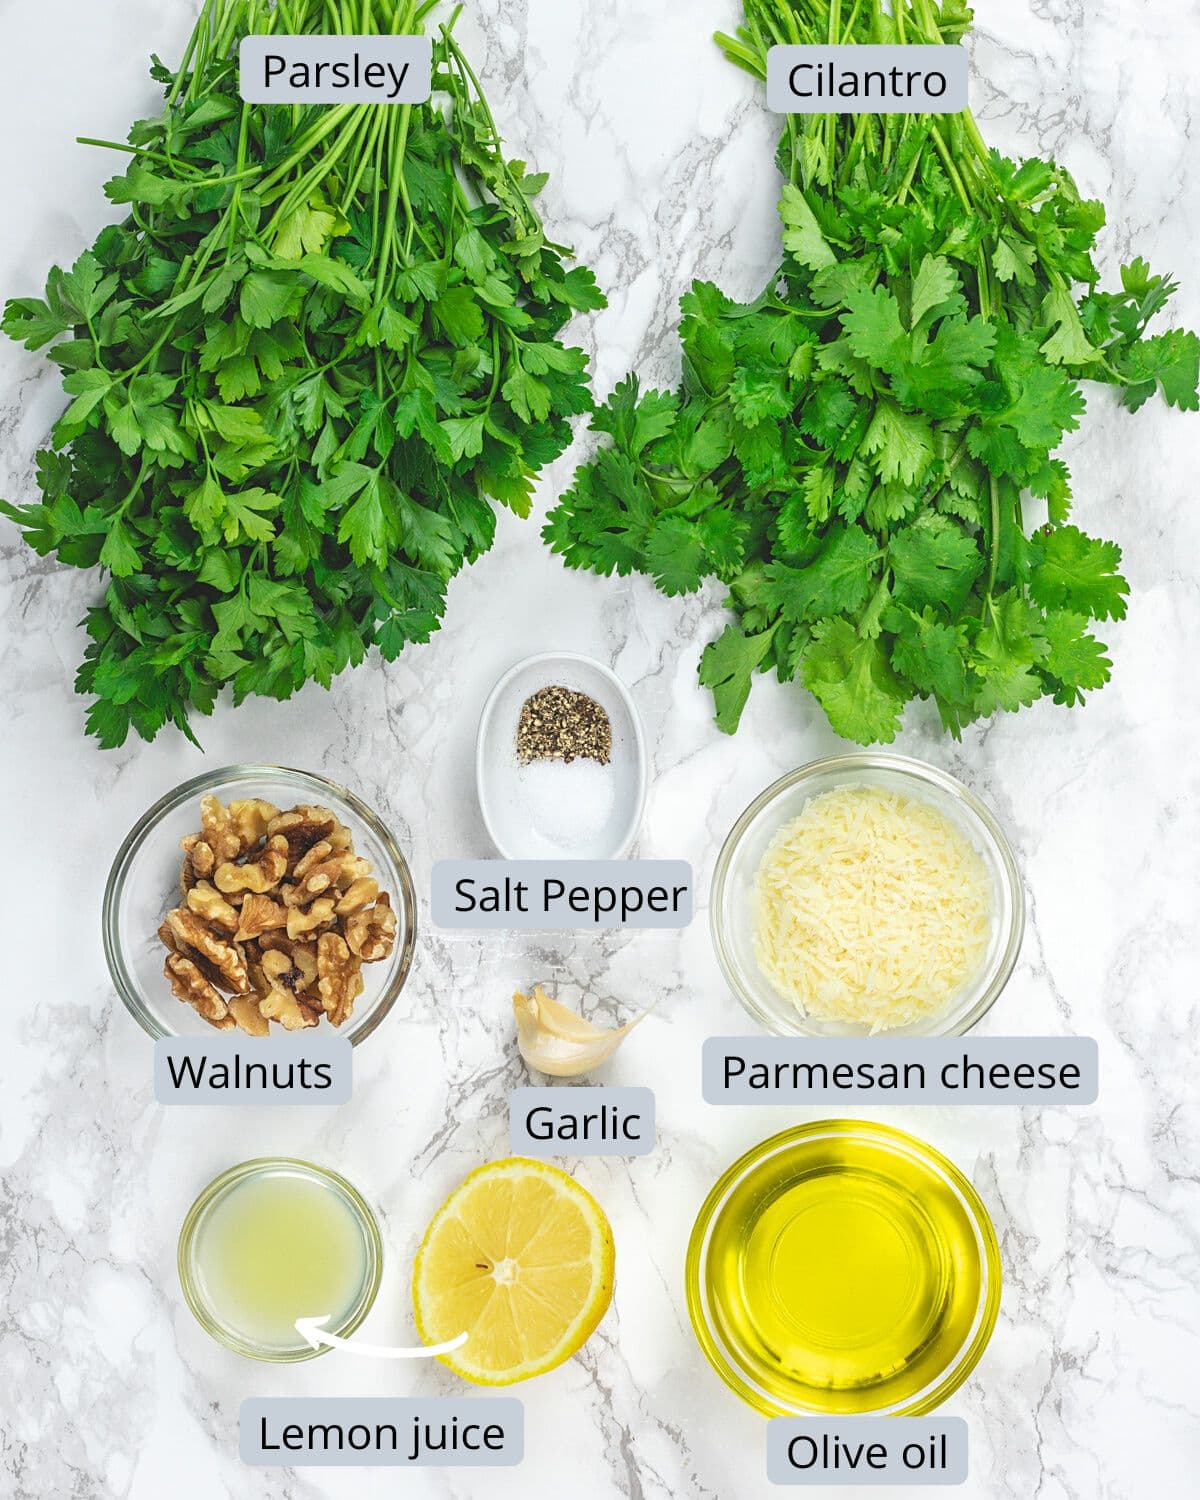 Parsley pesto ingredients in bowls with labels.